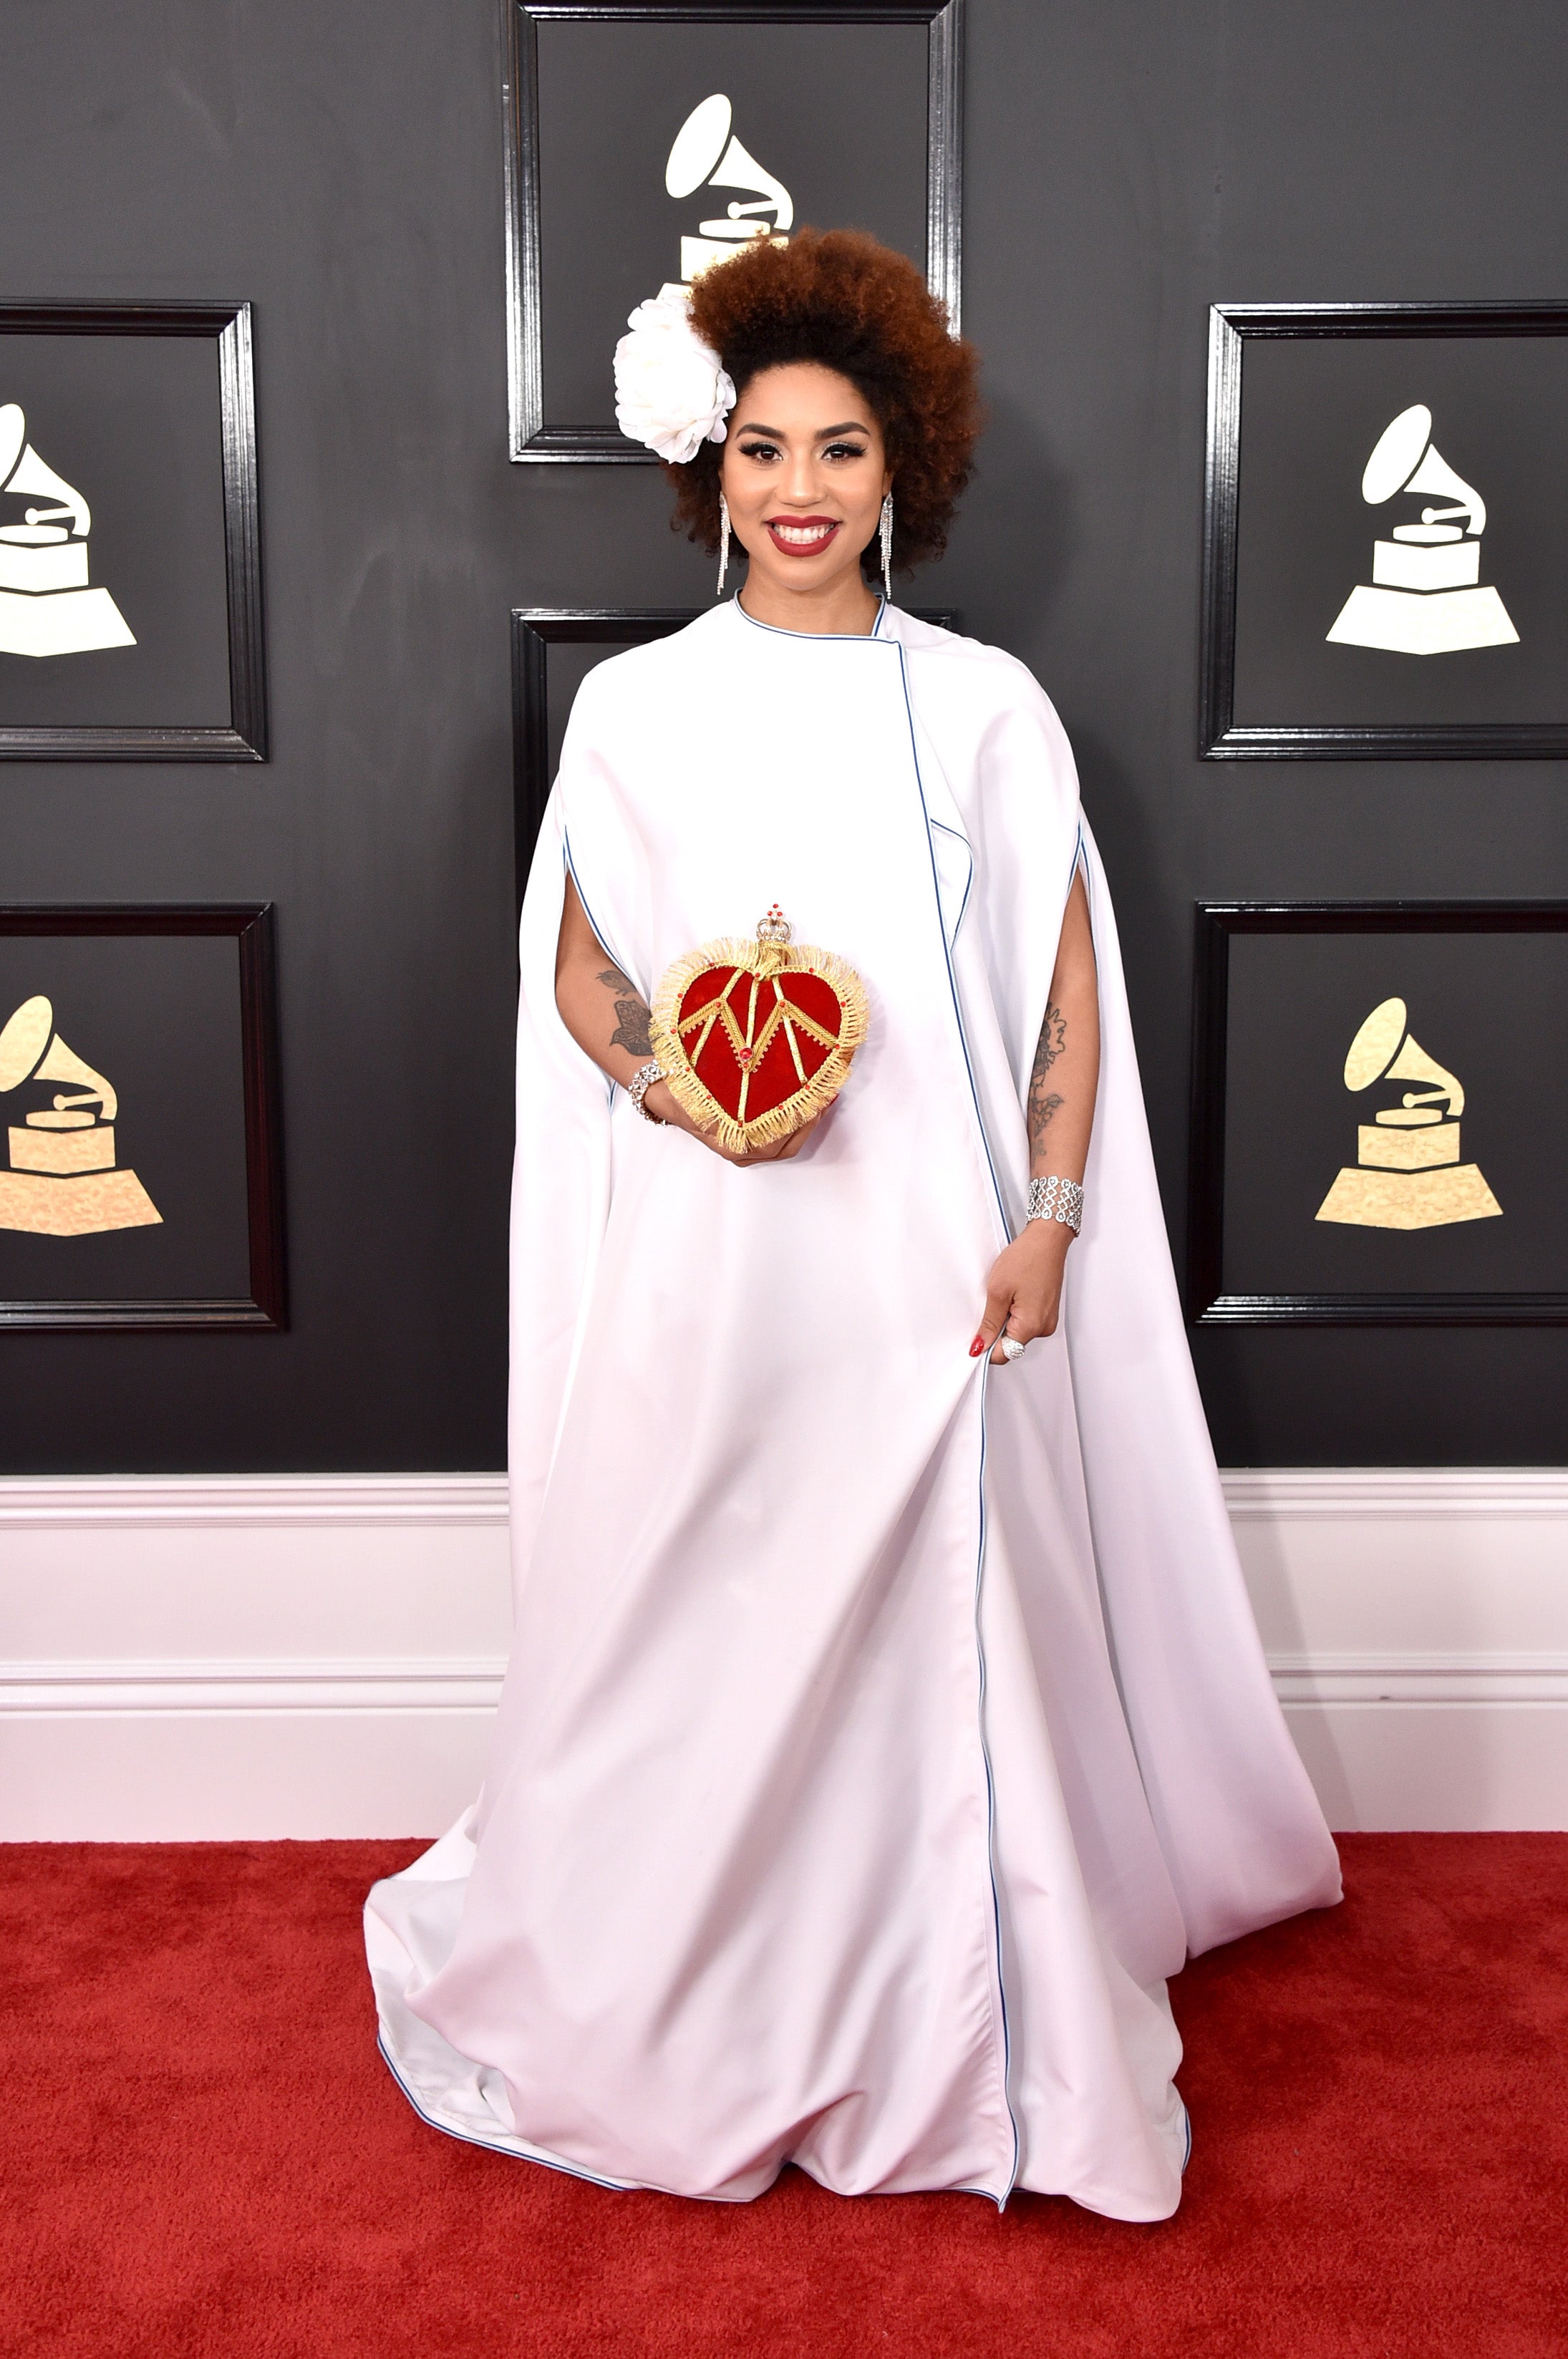 Singer Joy Villa Wears 'Make America Great Again' Gown to the Grammys 
